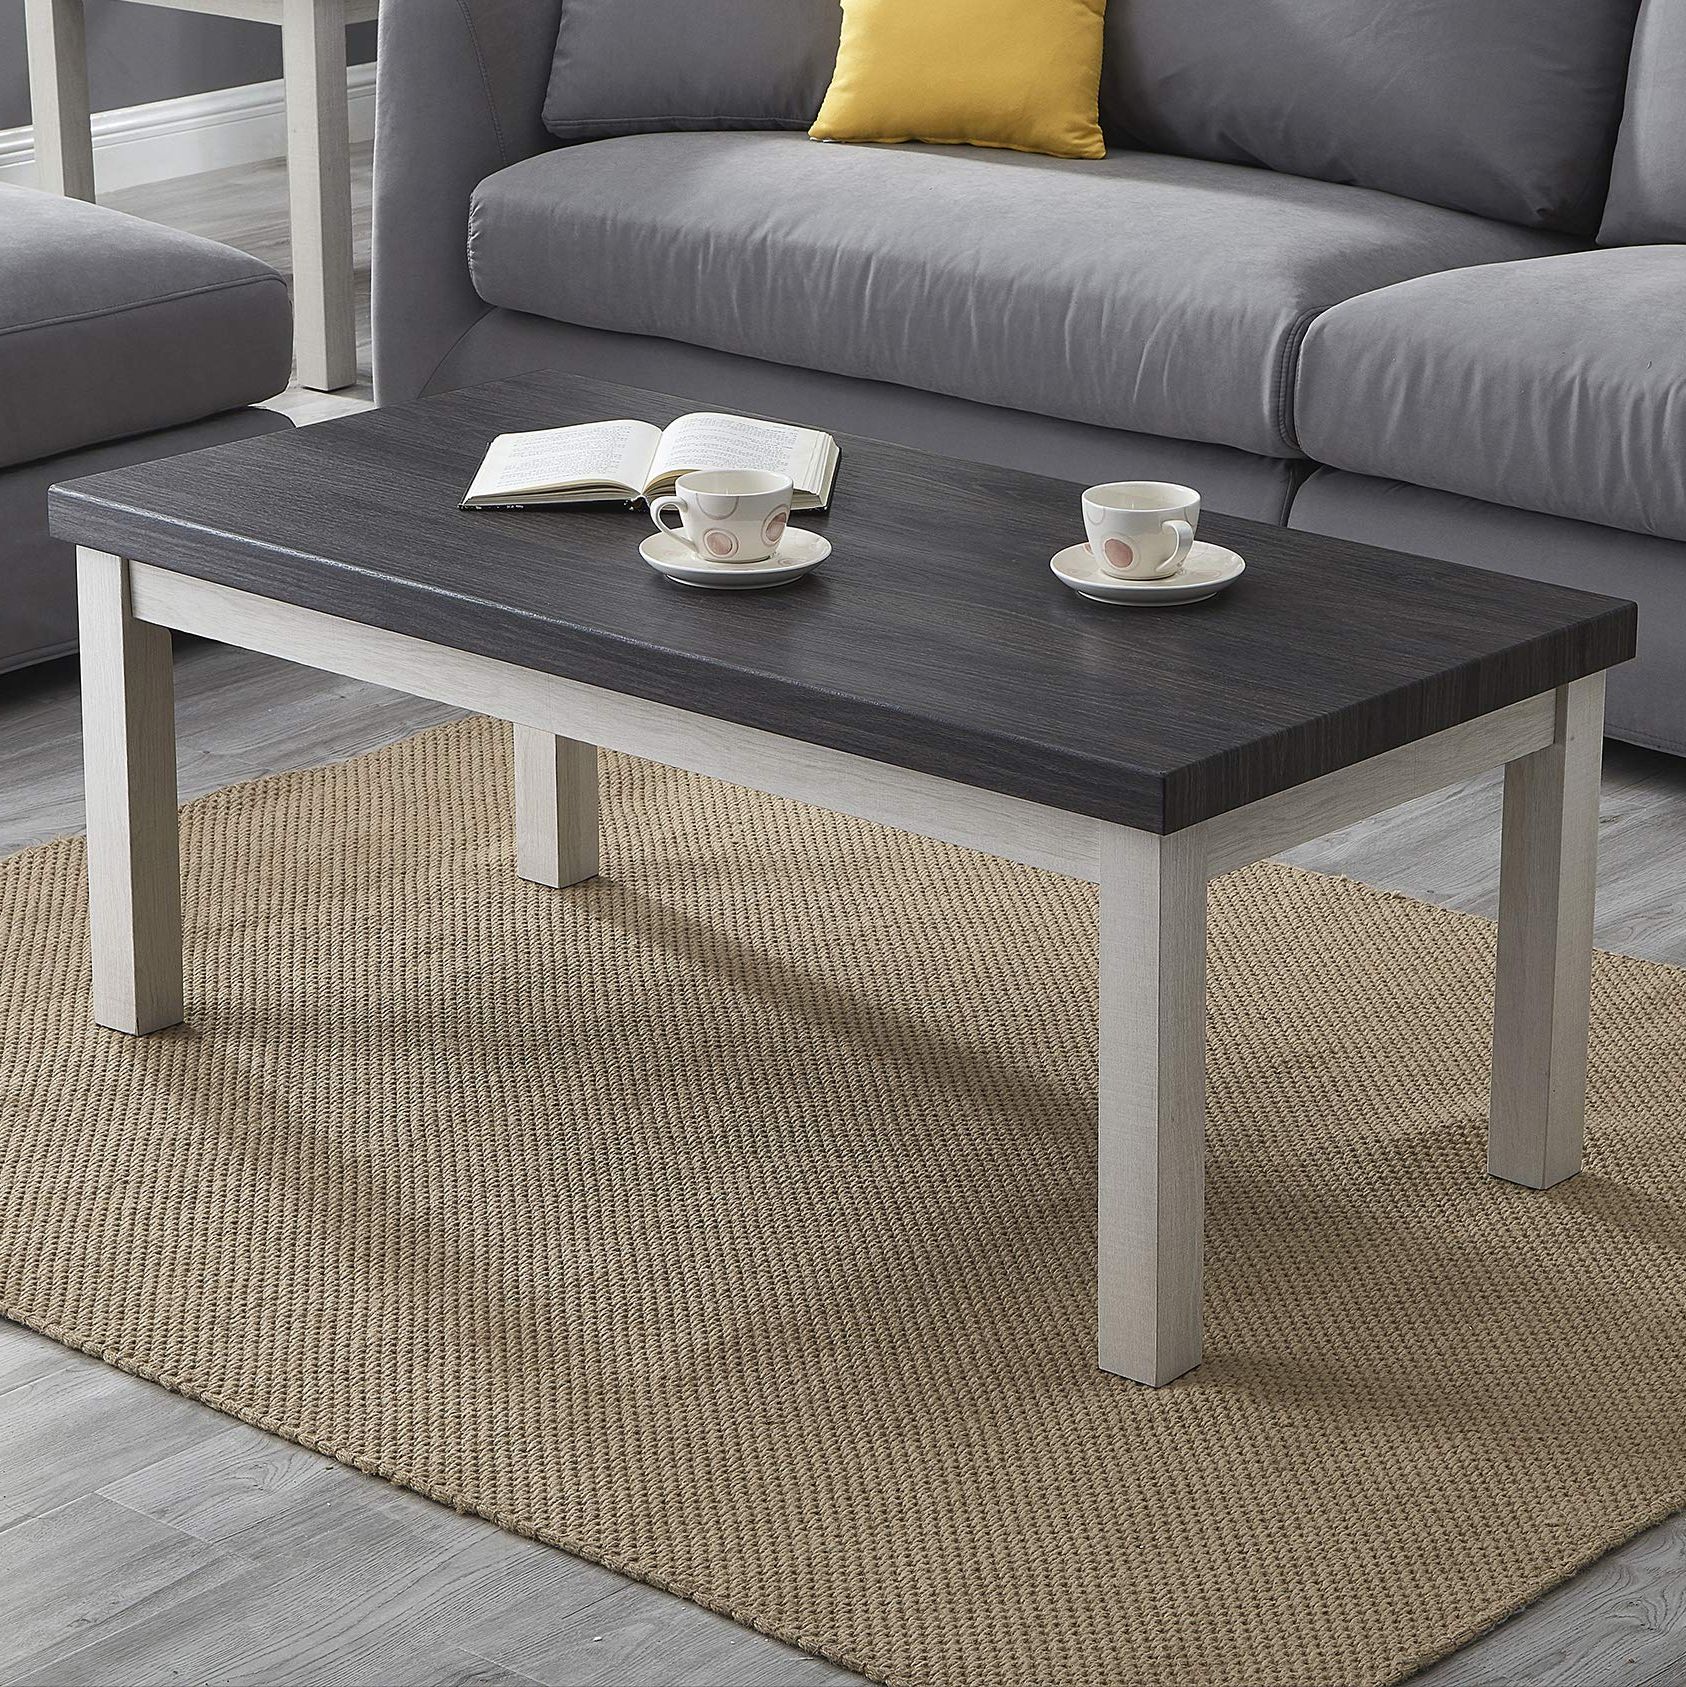 Pemberly Row Replicated Wood Coffee Tables Regarding Favorite Amazon: Roundhill Furniture Ronan Two Tone Wood Rectangle Coffee Table,  Gray : Home & Kitchen (View 6 of 10)